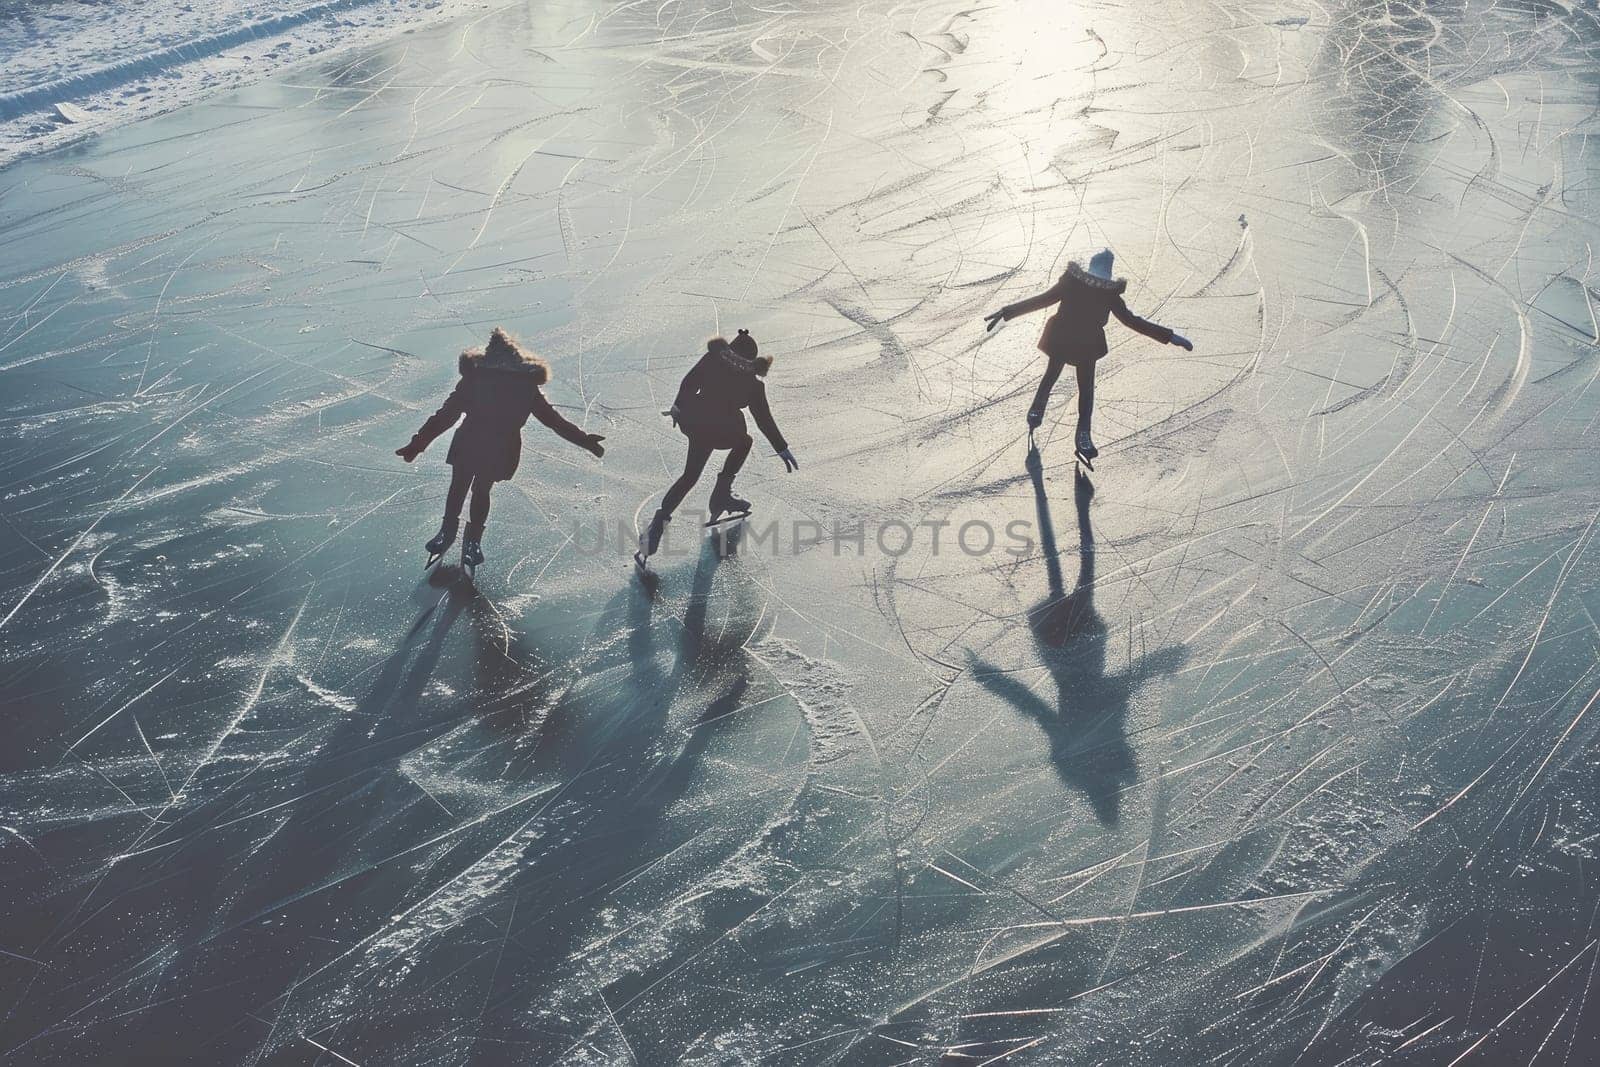 Ice skaters gliding gracefully on a frozen lake, capturing the beauty and precision